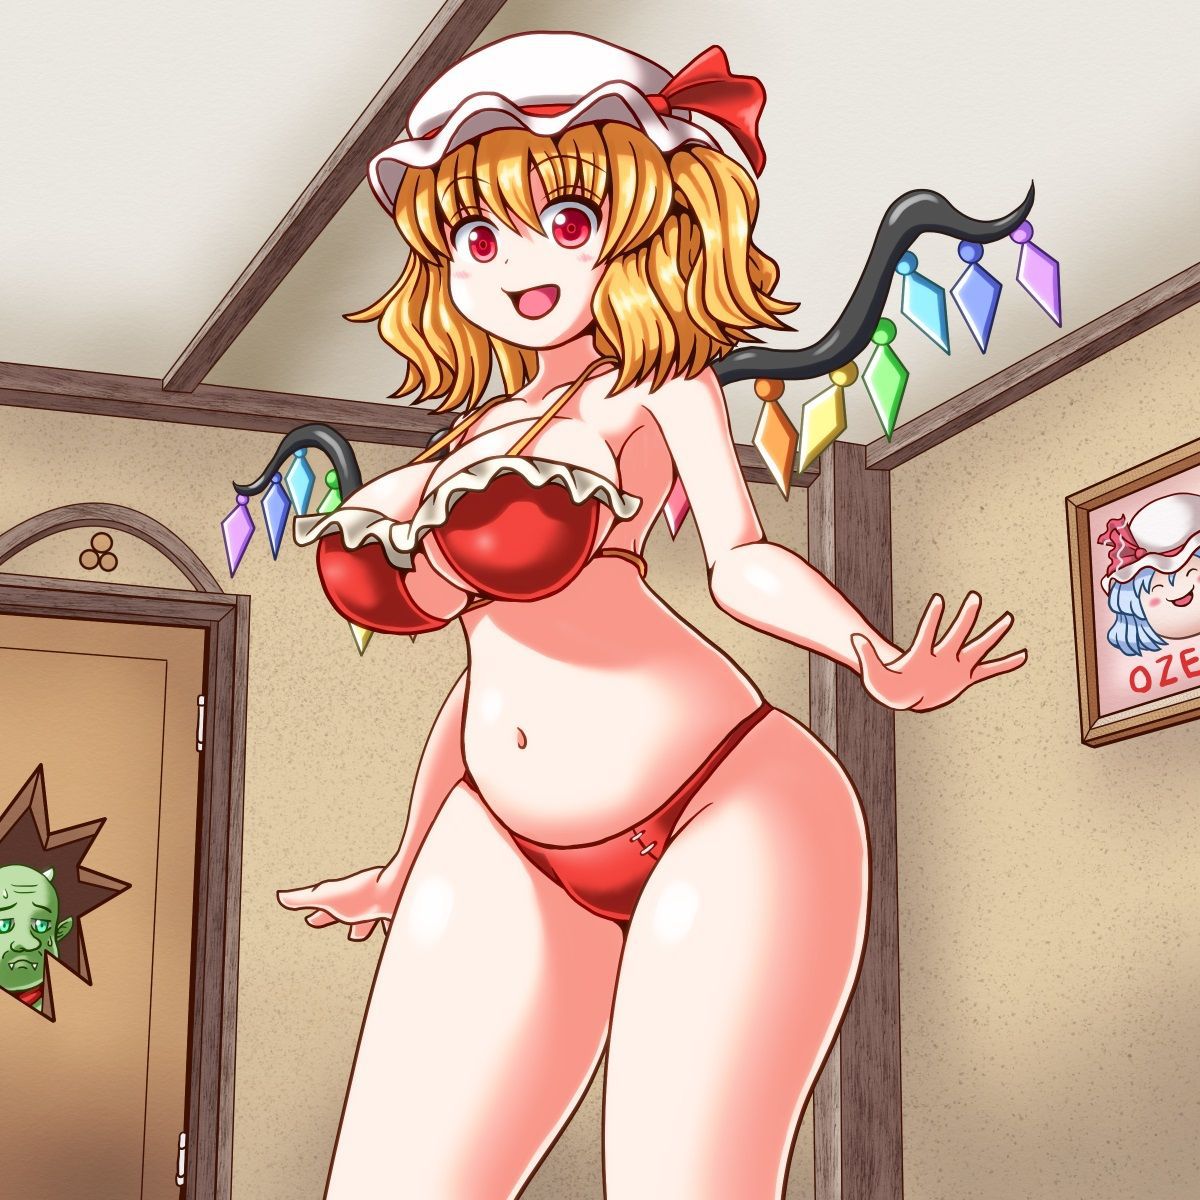 Touhou image various 297 50 pictures 47